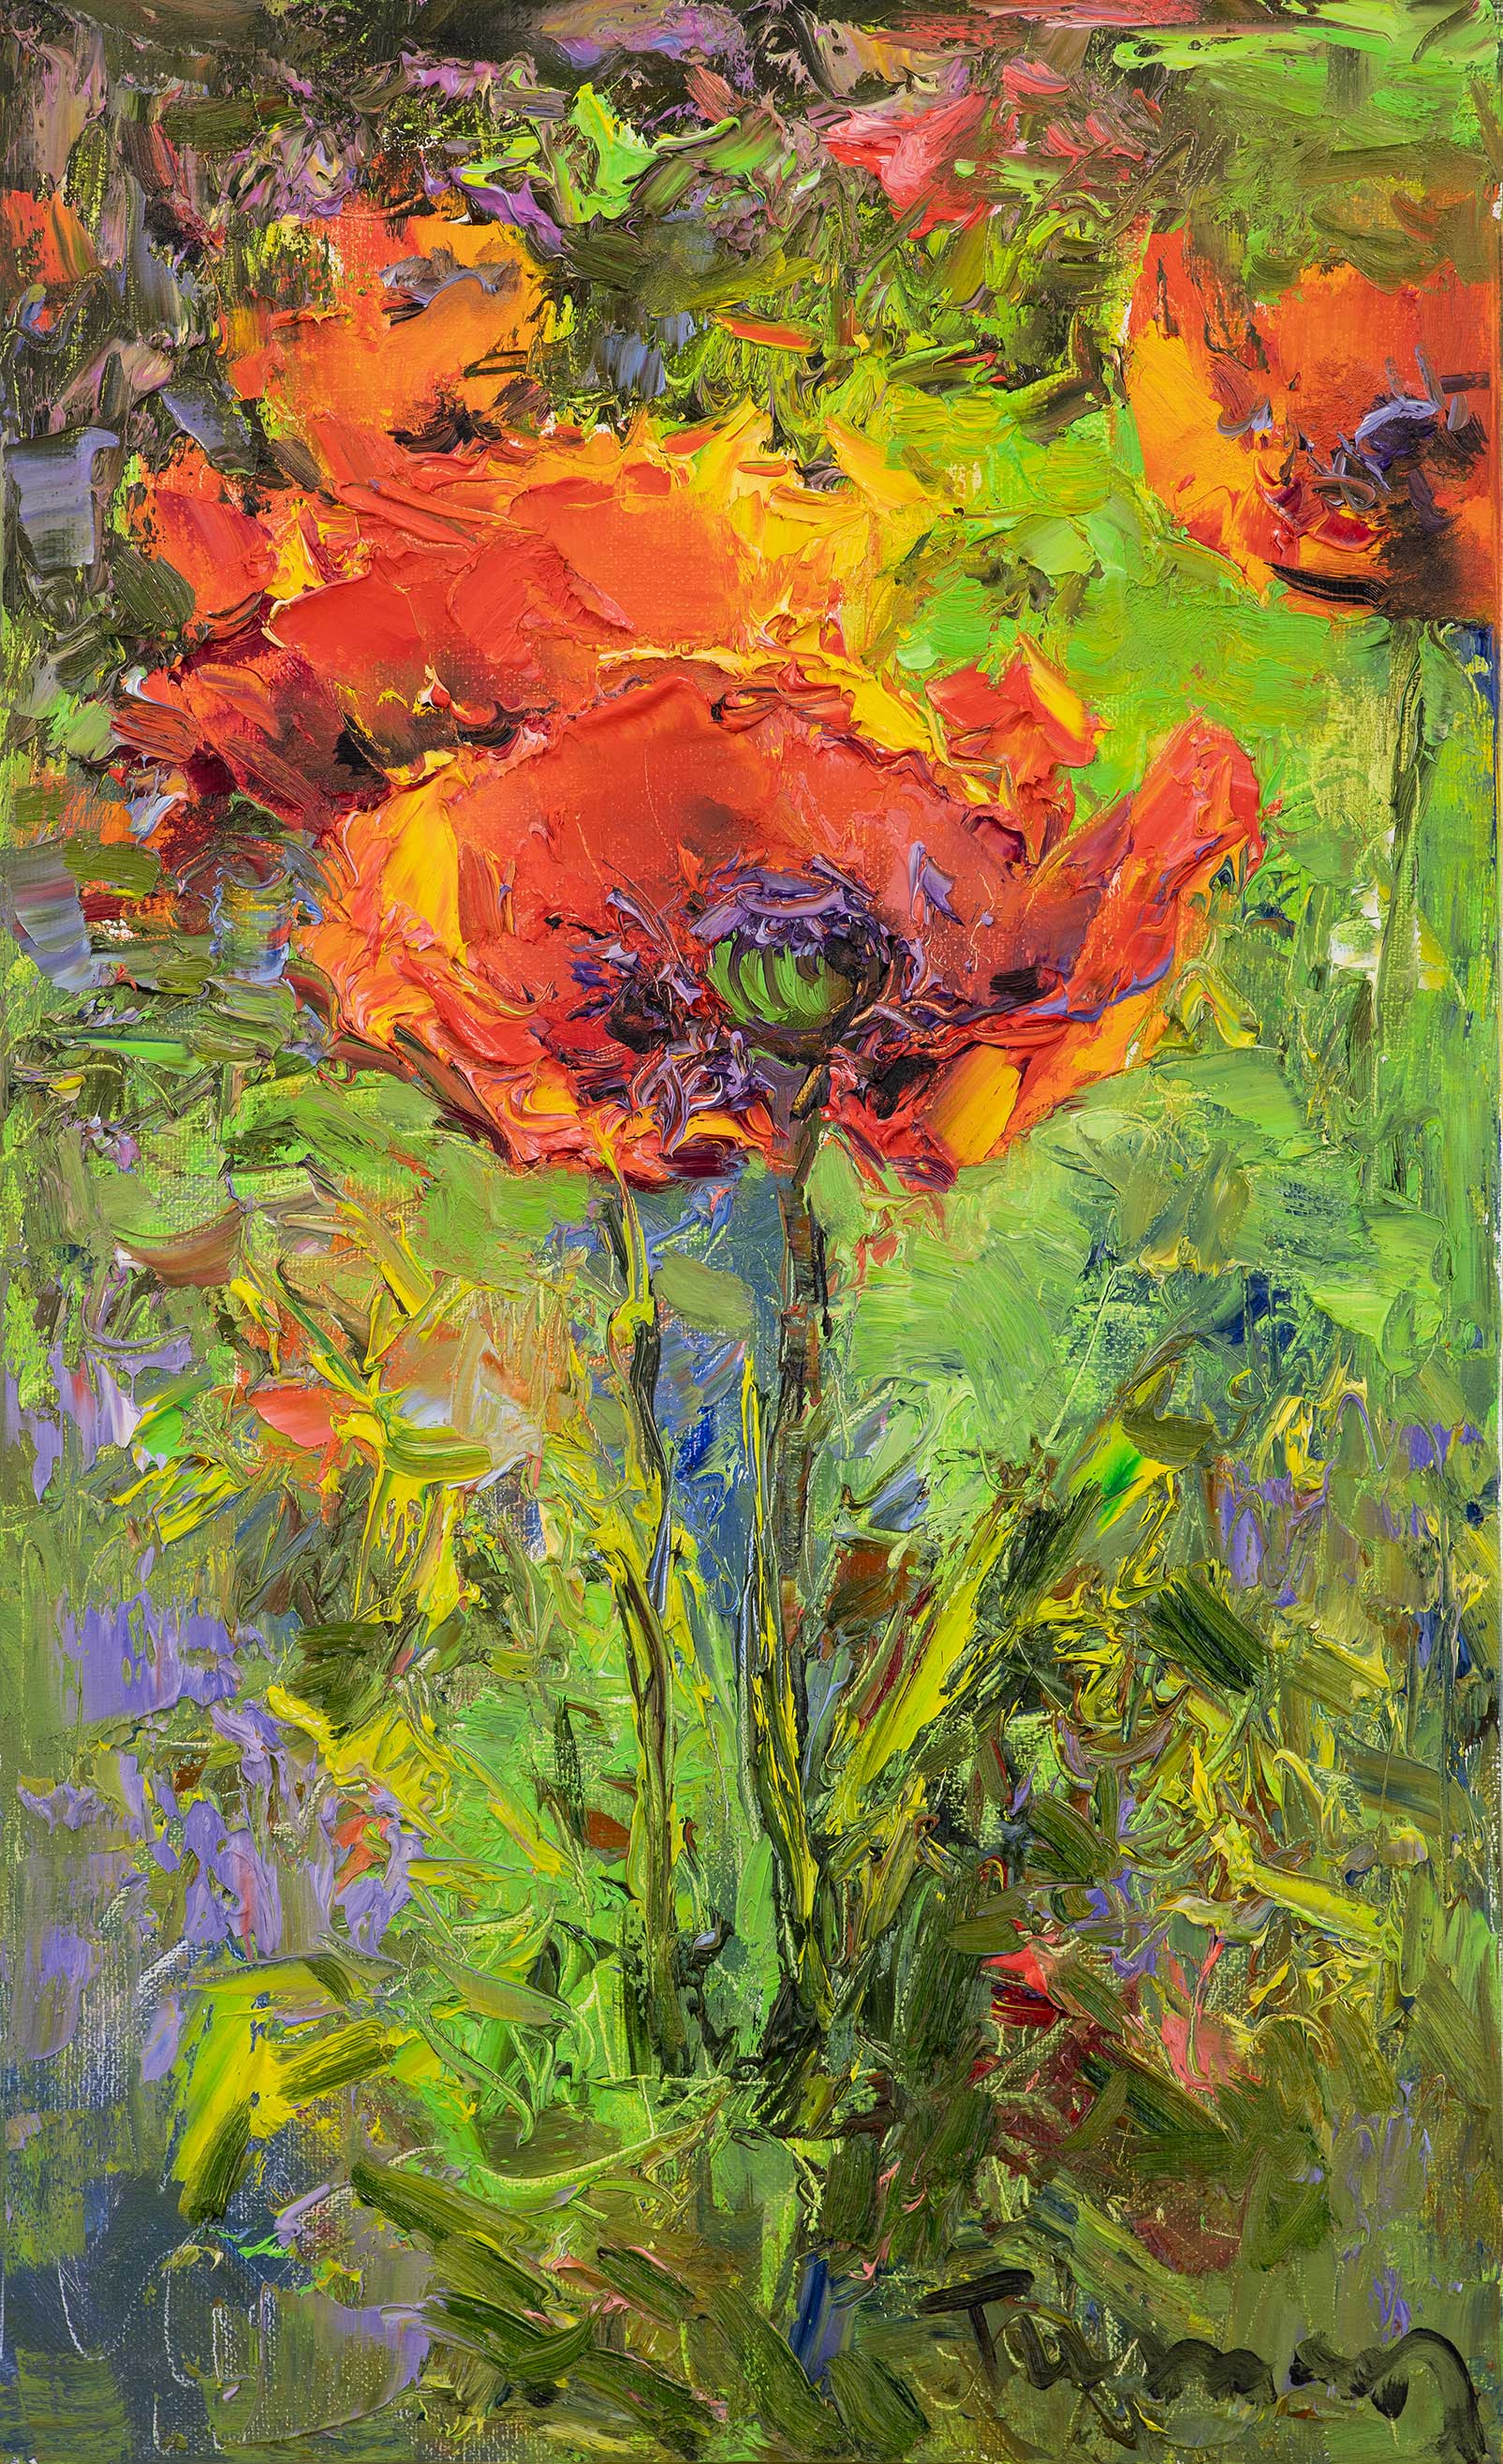 Fire Poppies - 1, Tuman Zhumabaev, Buy the painting Oil